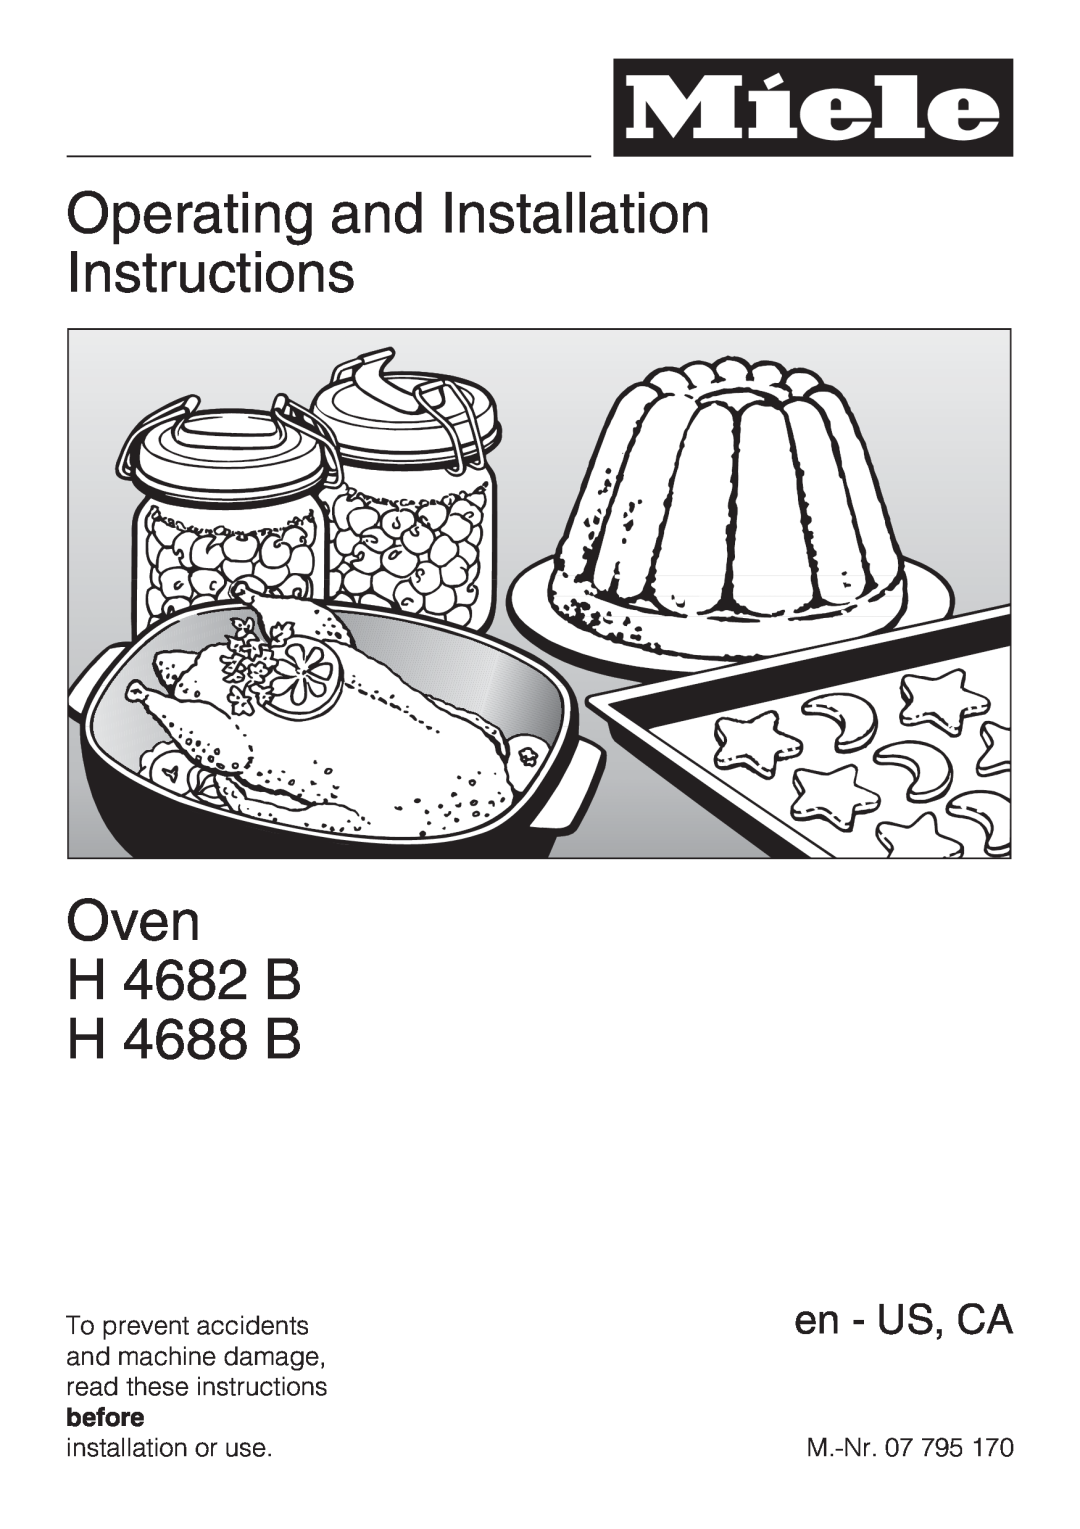 Miele H4682B installation instructions Operating and Installation Instructions Oven, H 4682 B H 4688 B, en - US, CA 